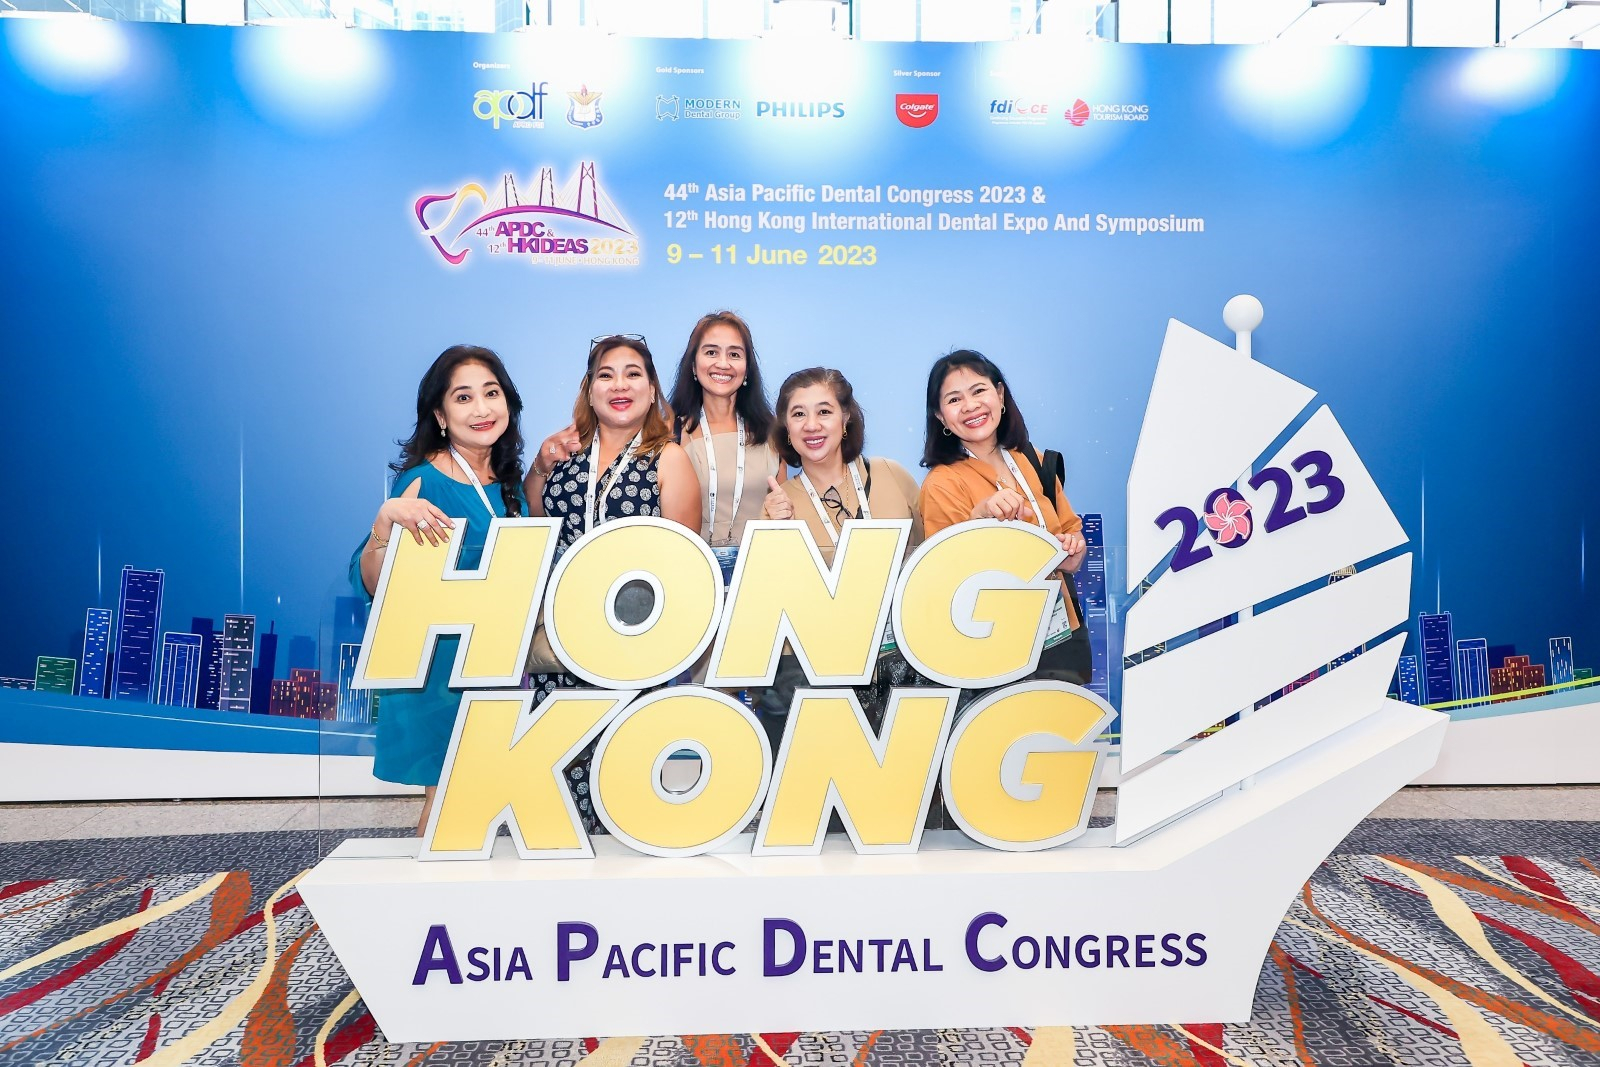 The 44th Asia Pacific Dental Congress 2023 successfully attracted over 5,000 dentists and dental industry related participants from local and around the world.